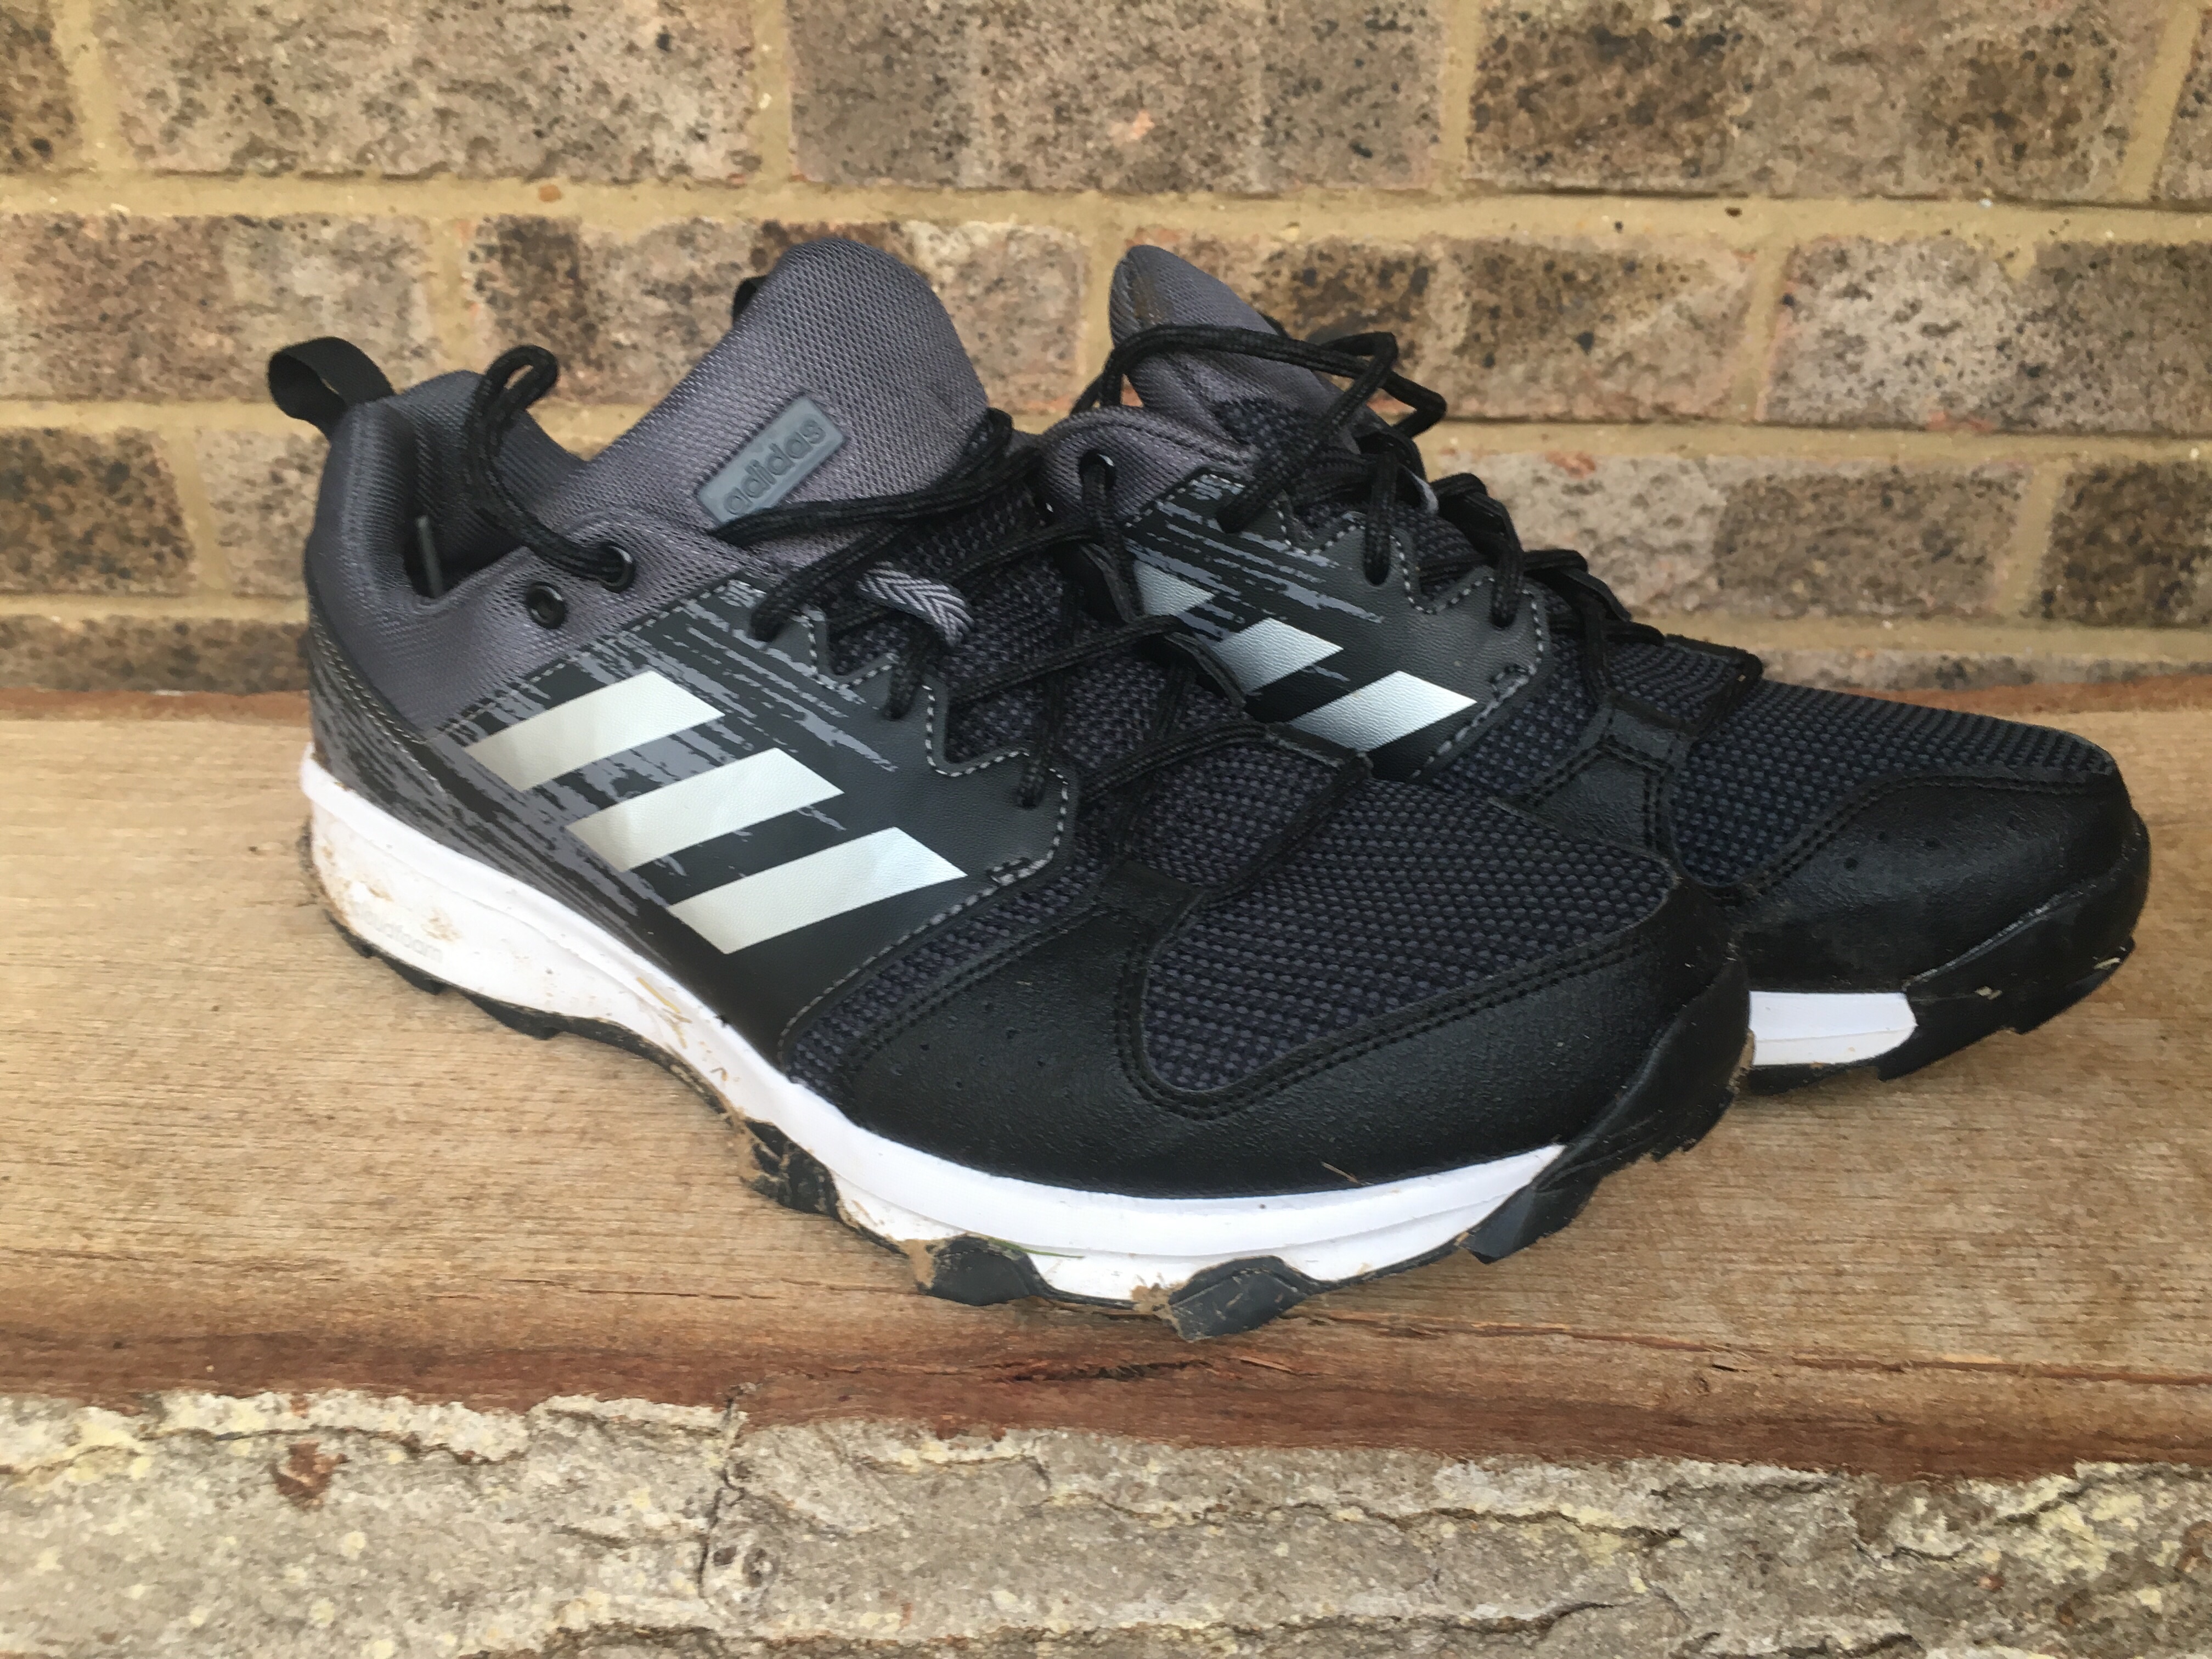 Addidas Galaxy Trail Shoes Review | eat 